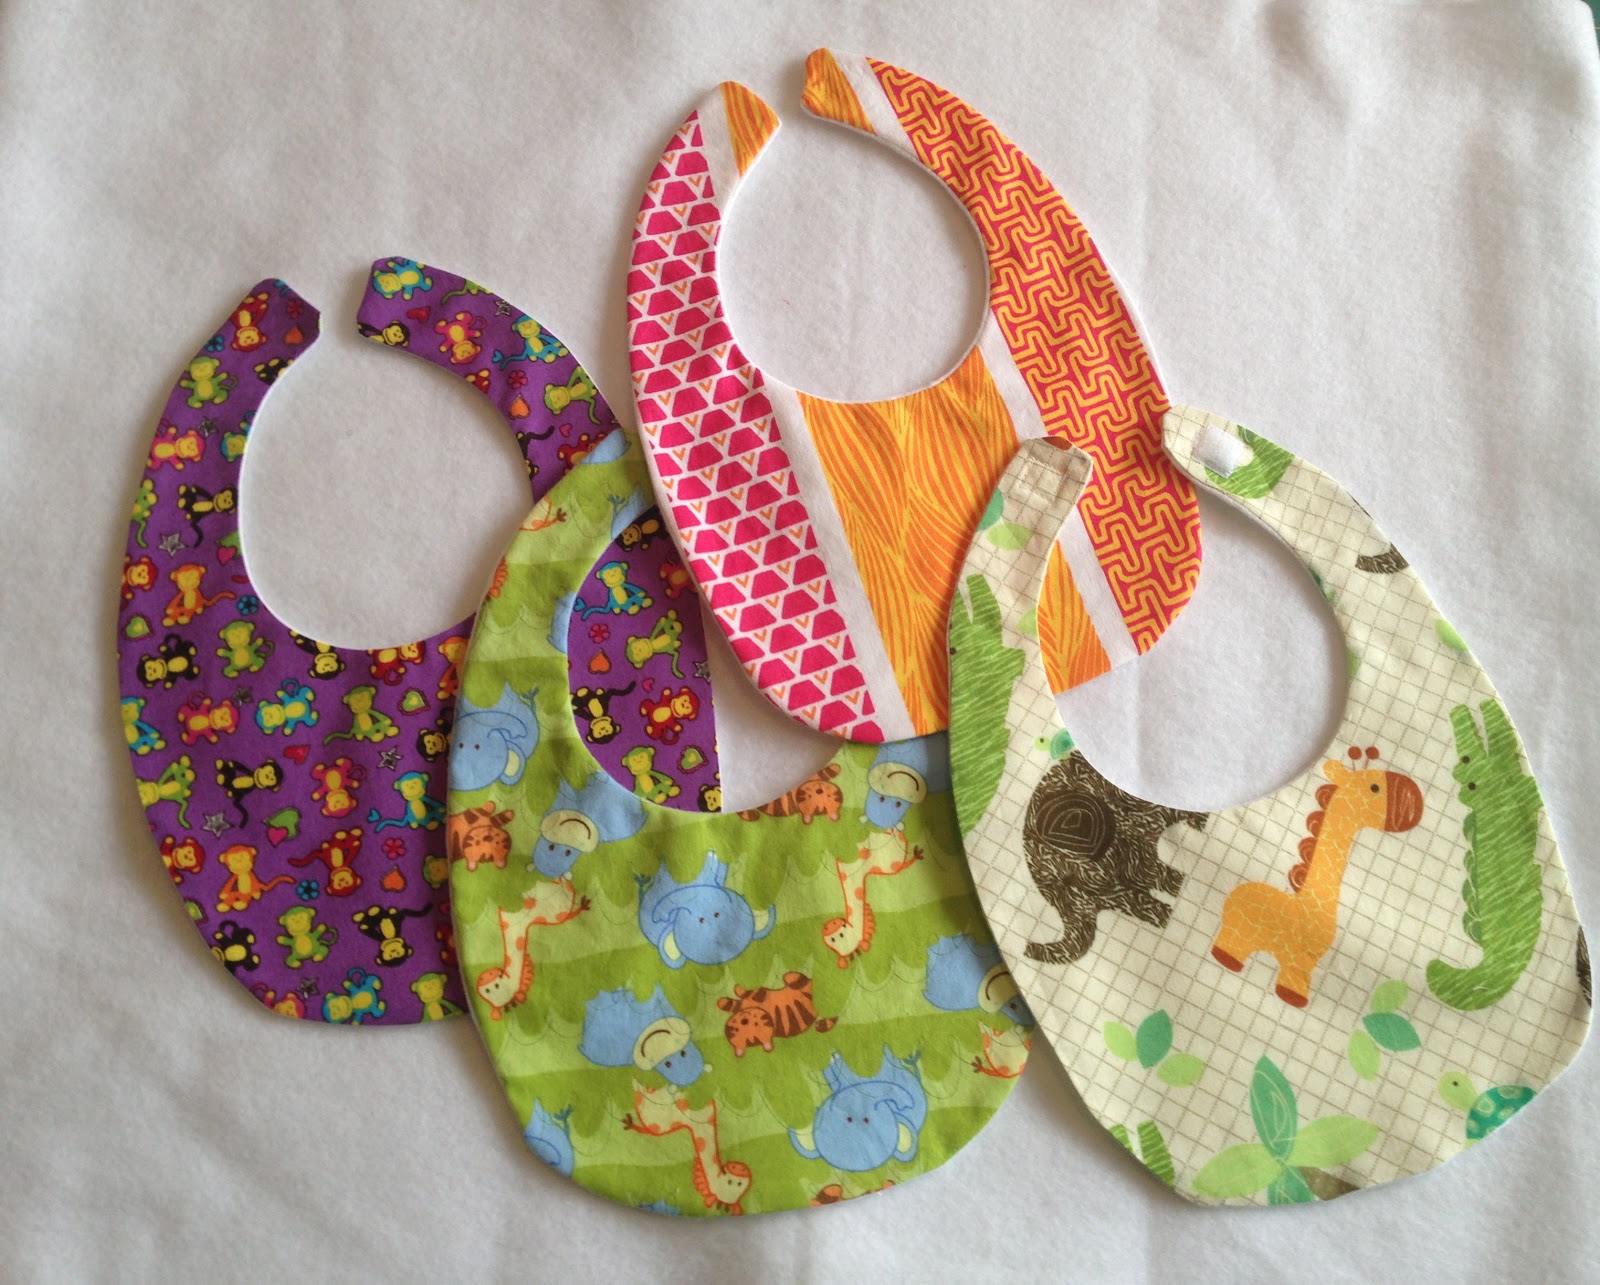 Sew Crafty Chemist: Finished Items: Baby Bibs and Burp Cloths